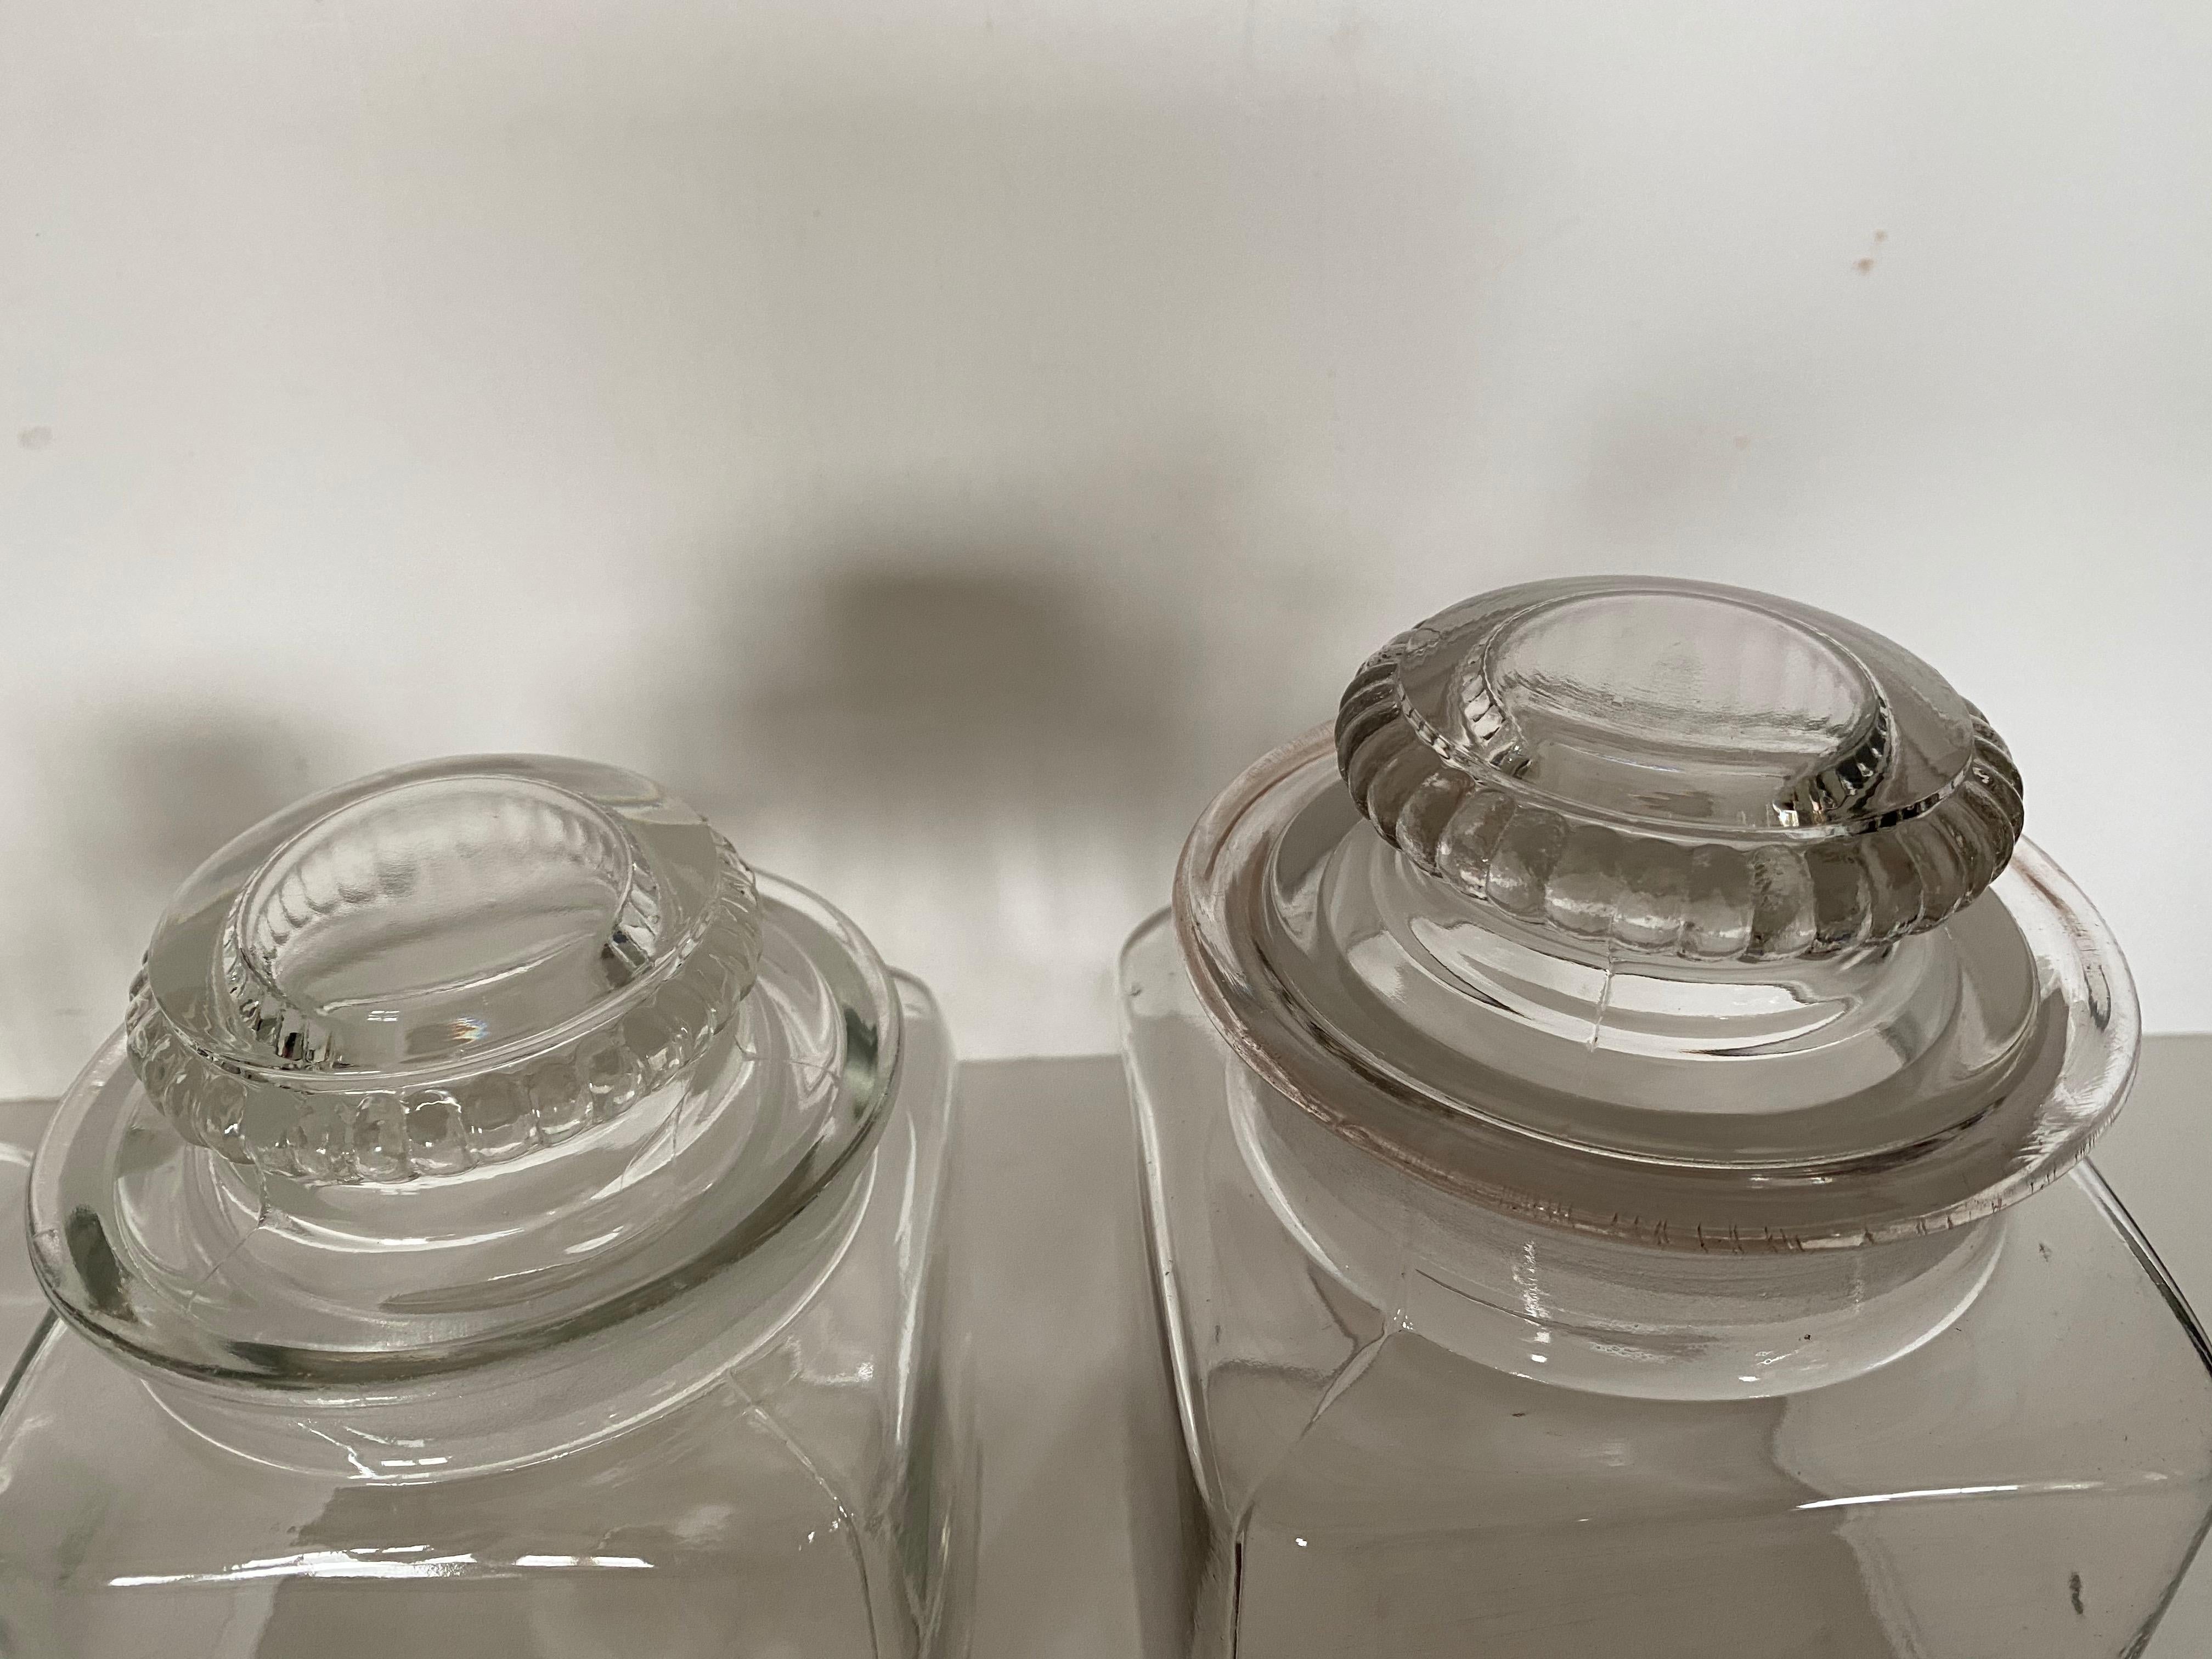 Set of 4 1920s Dakota graduated size square clear glass pharmacy canister jars with ground glass lid stopper. These glass canisters are wonderful to be displayed in the open to hold your favorite food items, pet food, treats! They are air tight so